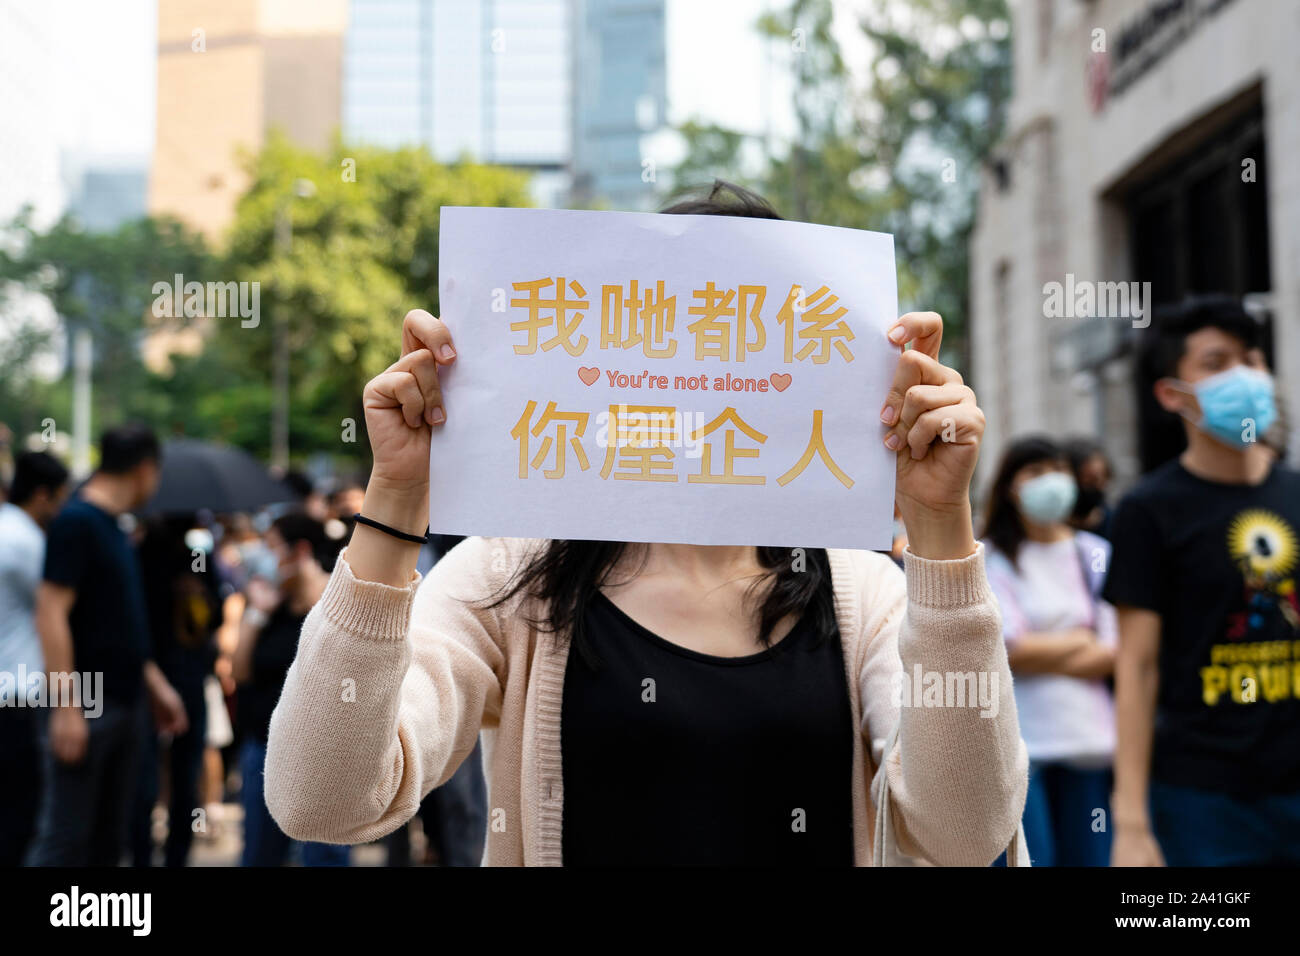 Hong Kong, China. 11th October 2019. Lunchtime flash mob demonstration by Pro-democracy demonstrators in Chater Square , Central District in Hong Kong. The protestors gathered to protest about treatment of those arrested by the police during Pro-democracy protests in the last 4 months. Police threatened to stop demonstration but it passed peacefully and concluded with march through city streets . Iain Masterton/Alamy Live News. Stock Photo